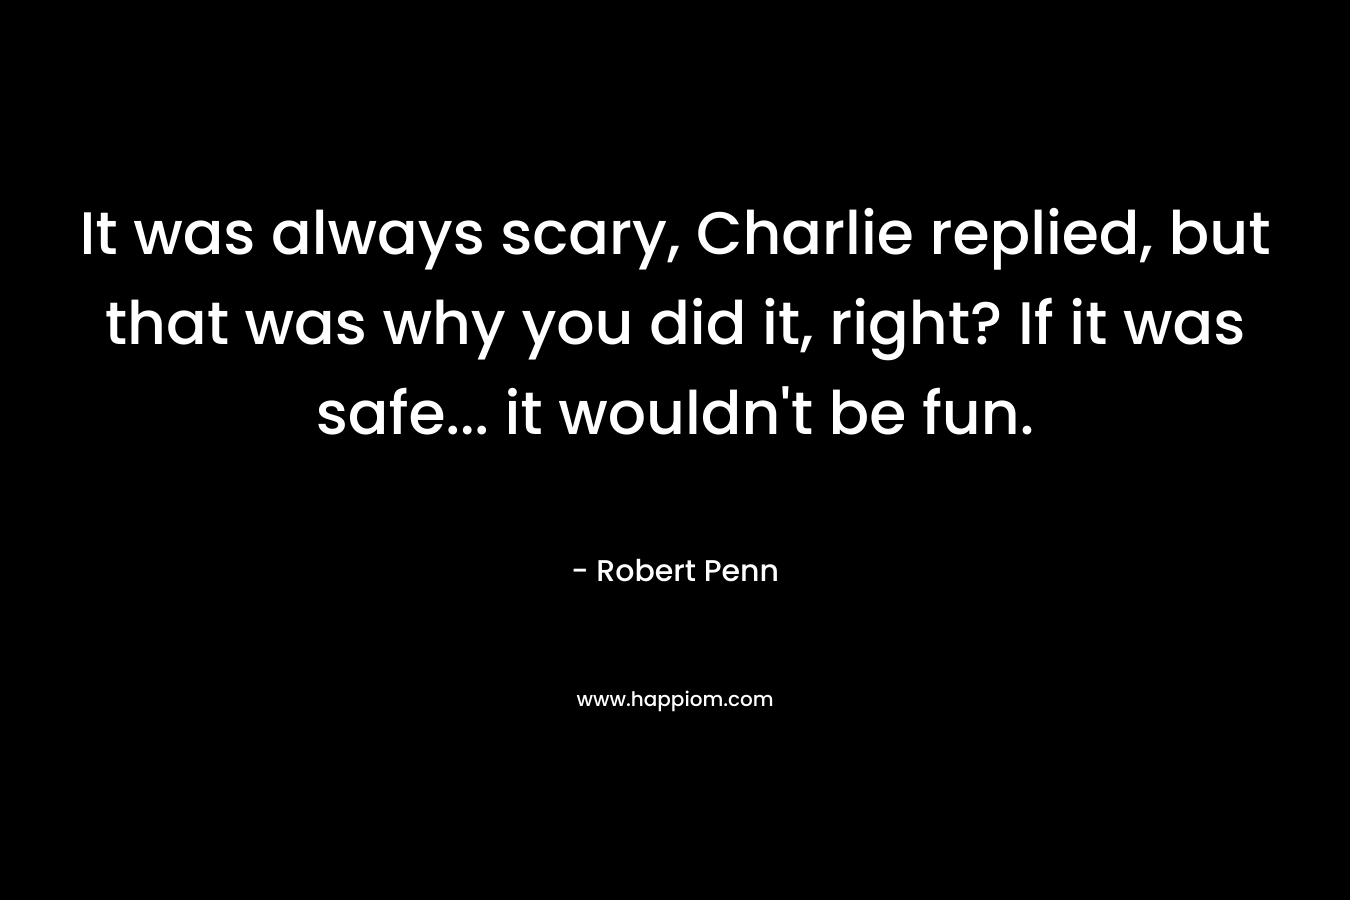 It was always scary, Charlie replied, but that was why you did it, right? If it was safe… it wouldn’t be fun. – Robert Penn